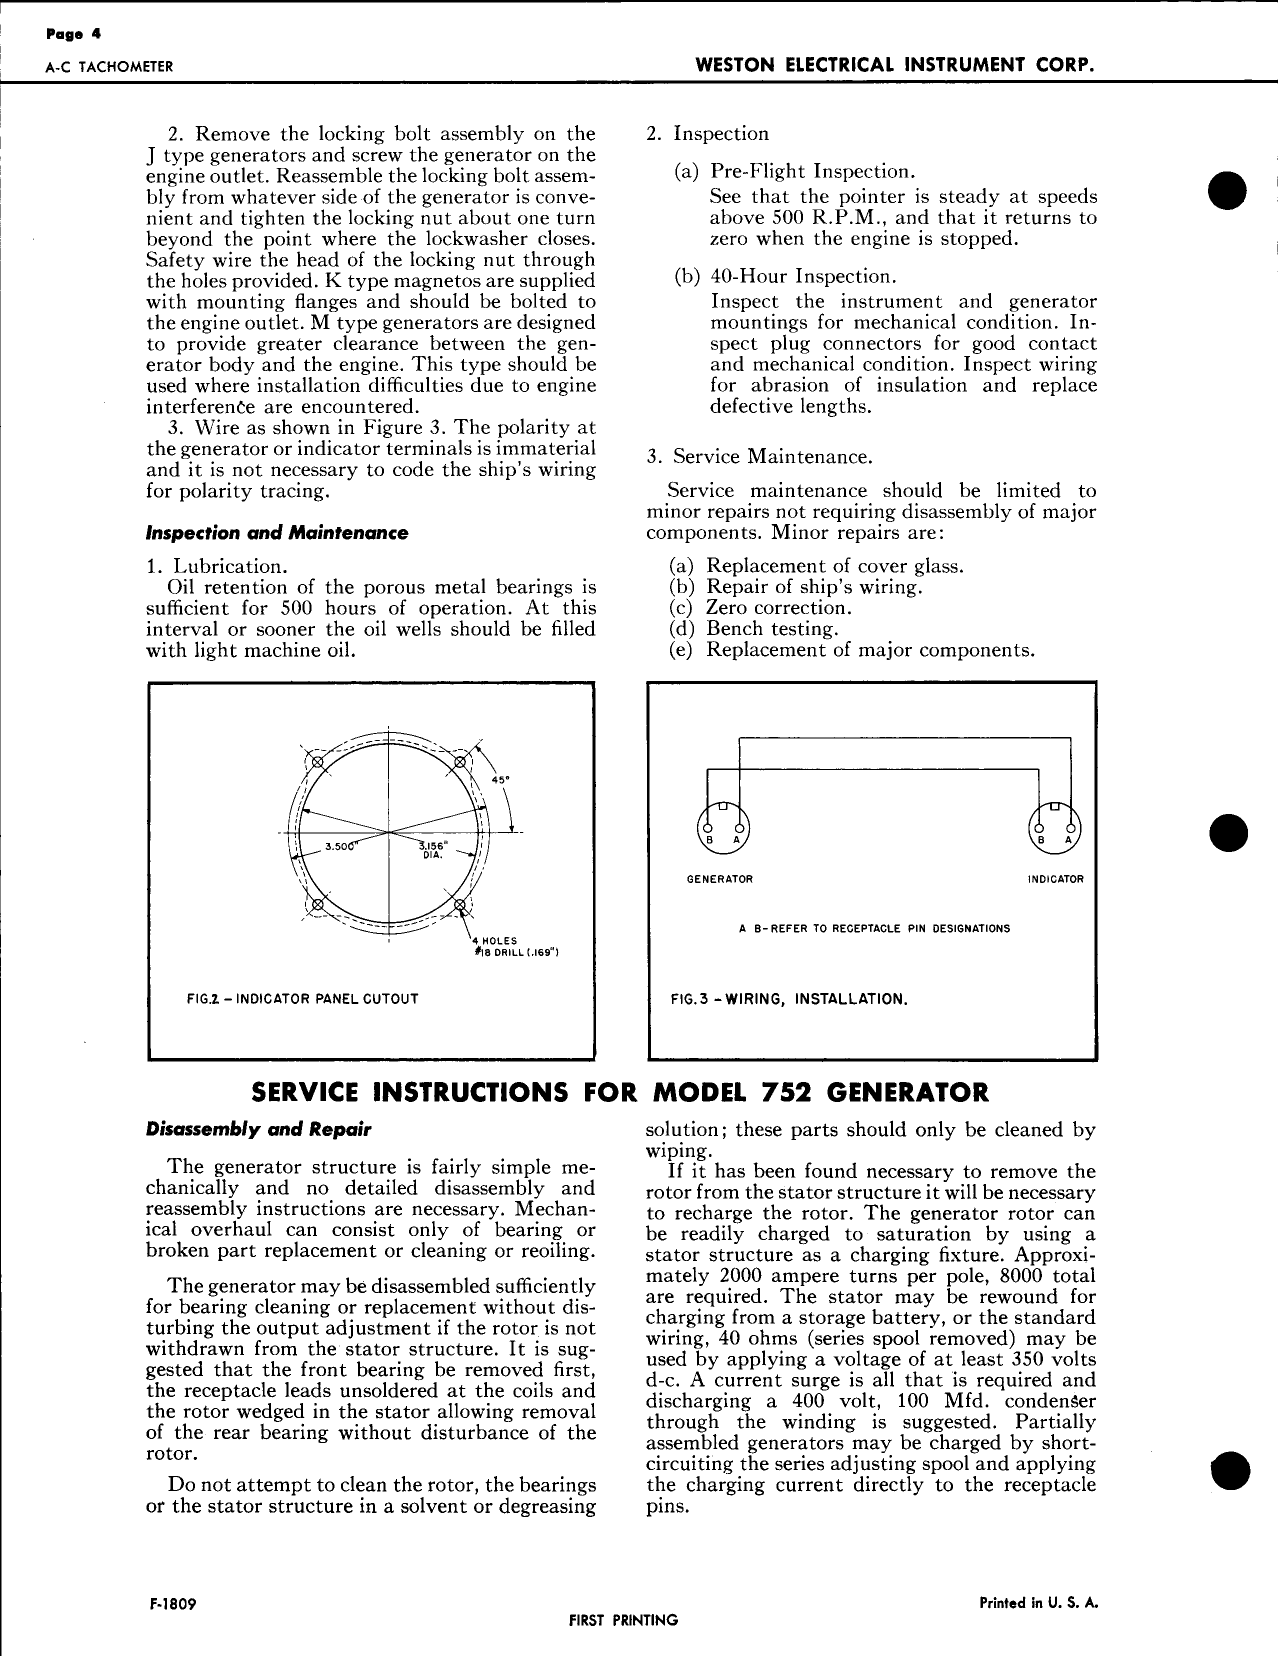 Sample page 4 from AirCorps Library document: Service Instructions for A-C Tachometer Model 752 Mag & 545R Indicator